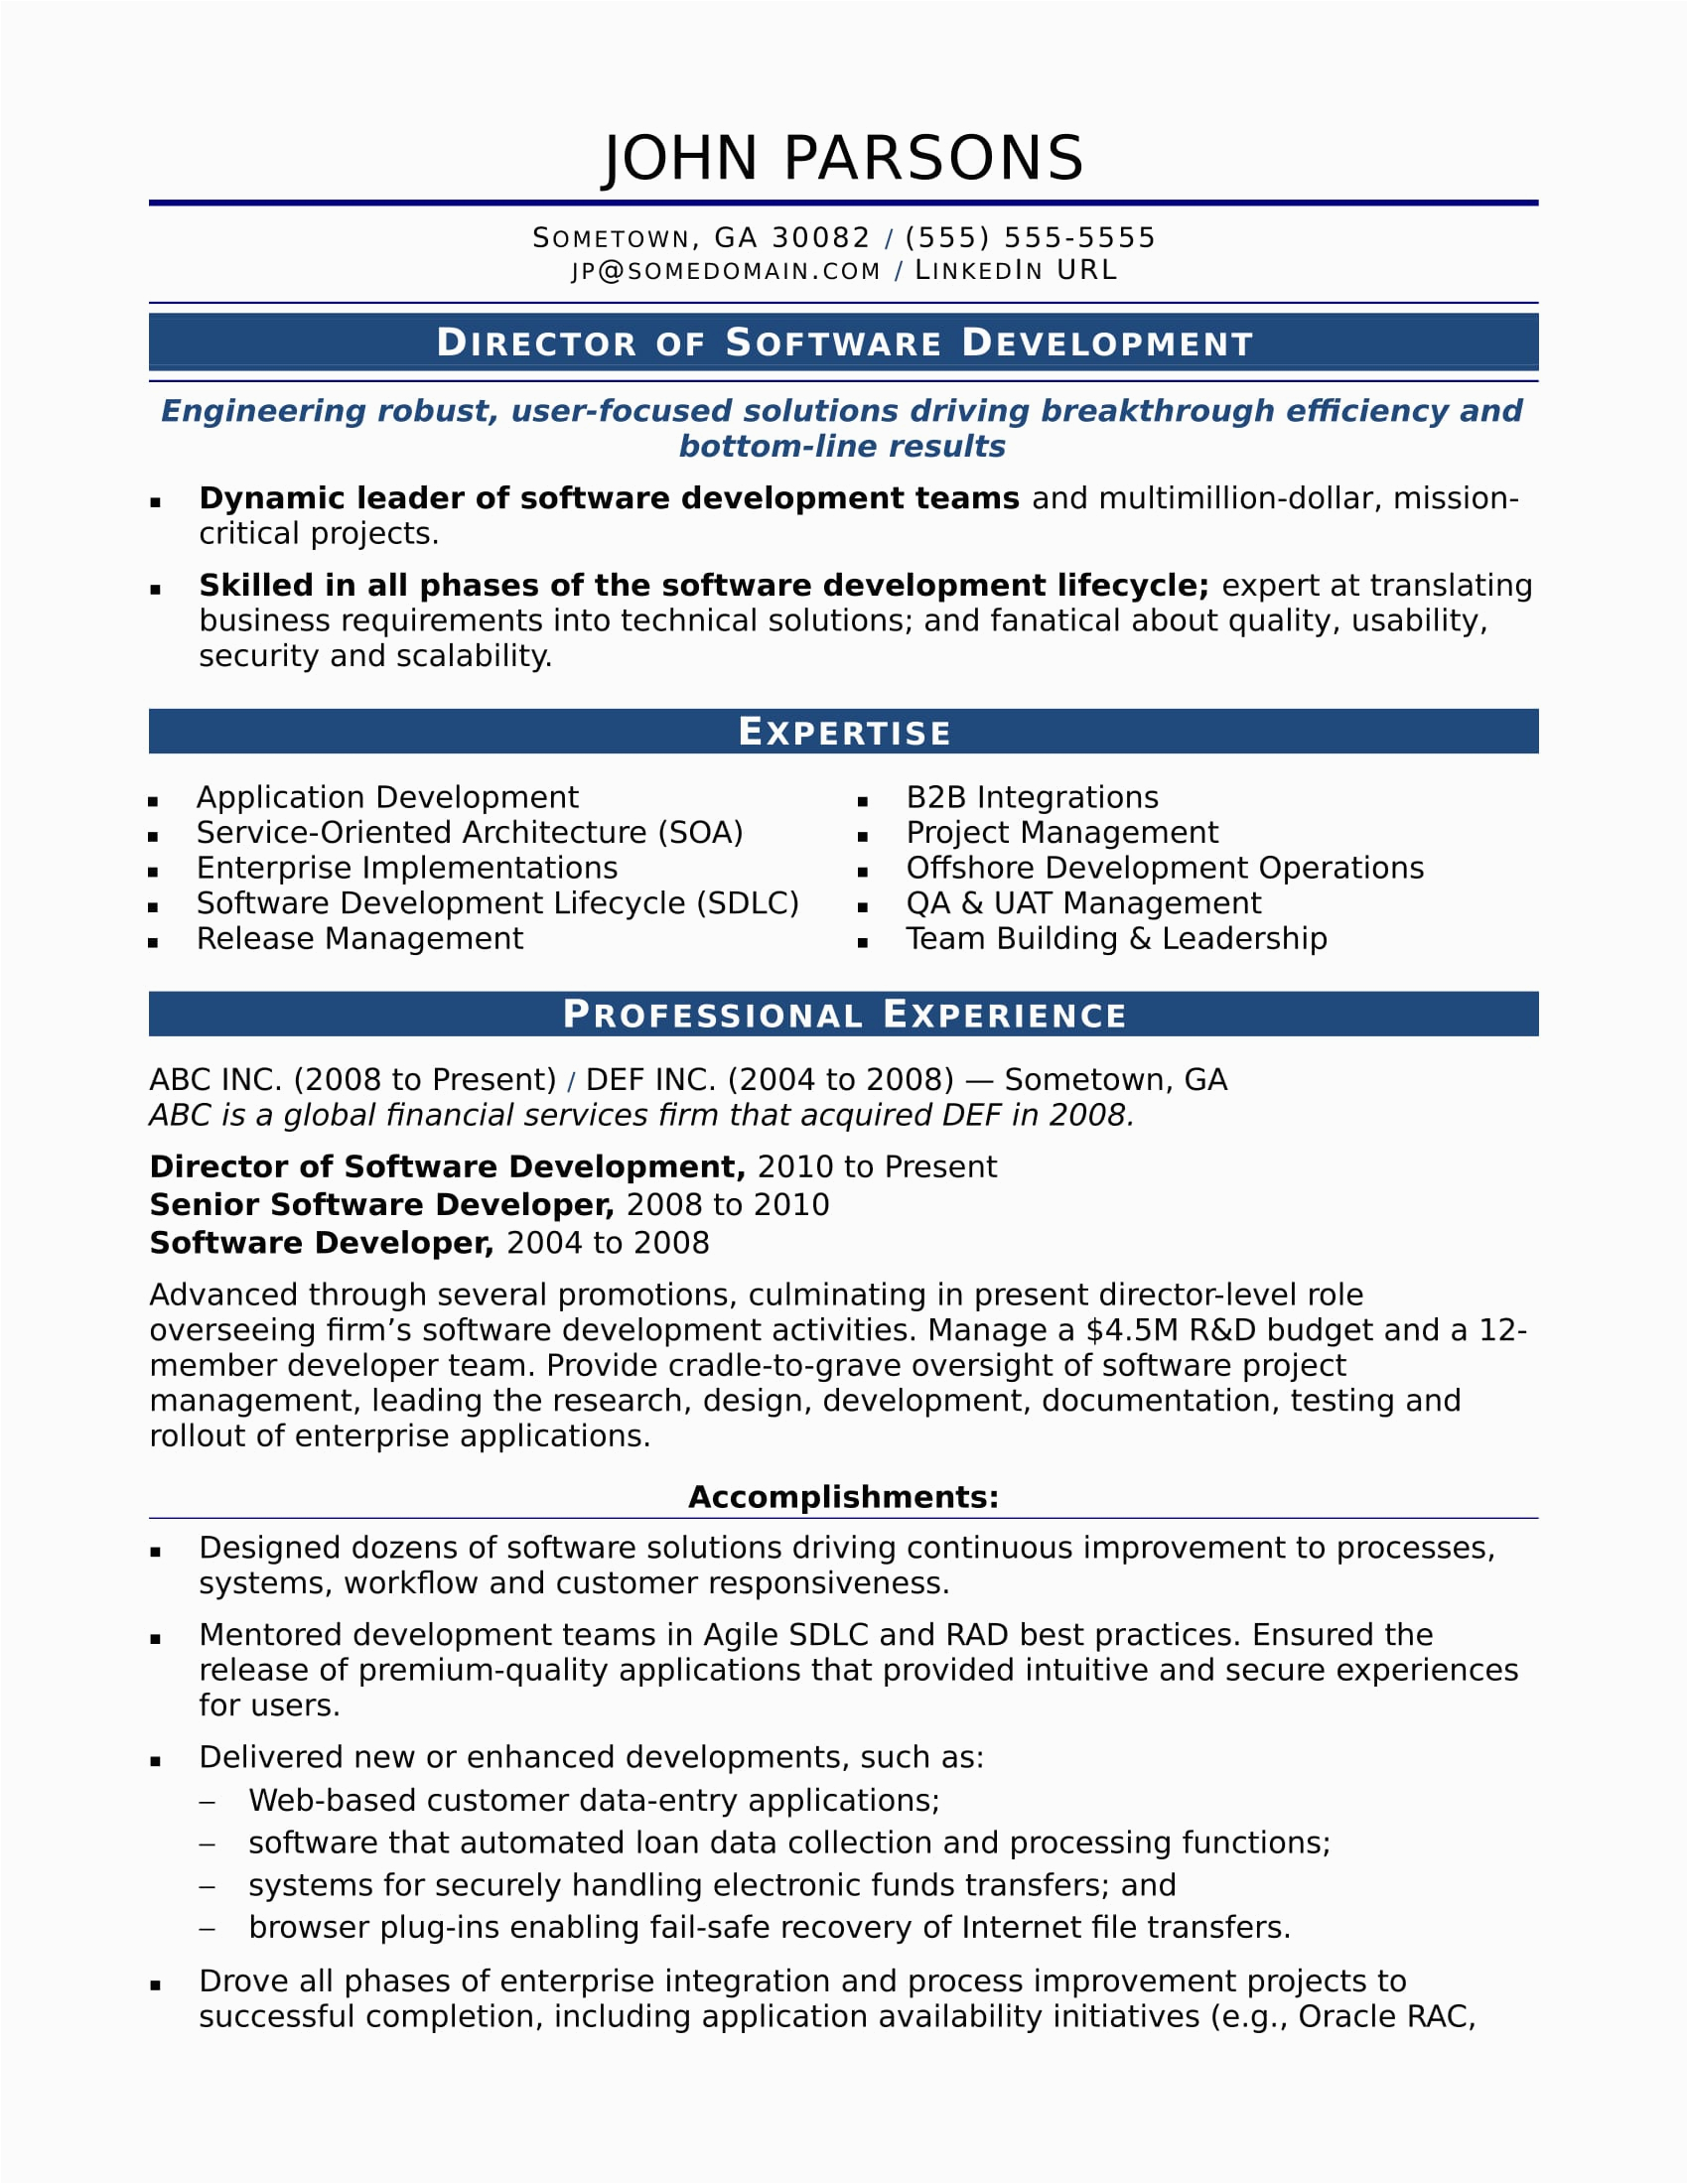 Resume Templates for Experienced software Professionals Sample Resume for An Experienced It Developer